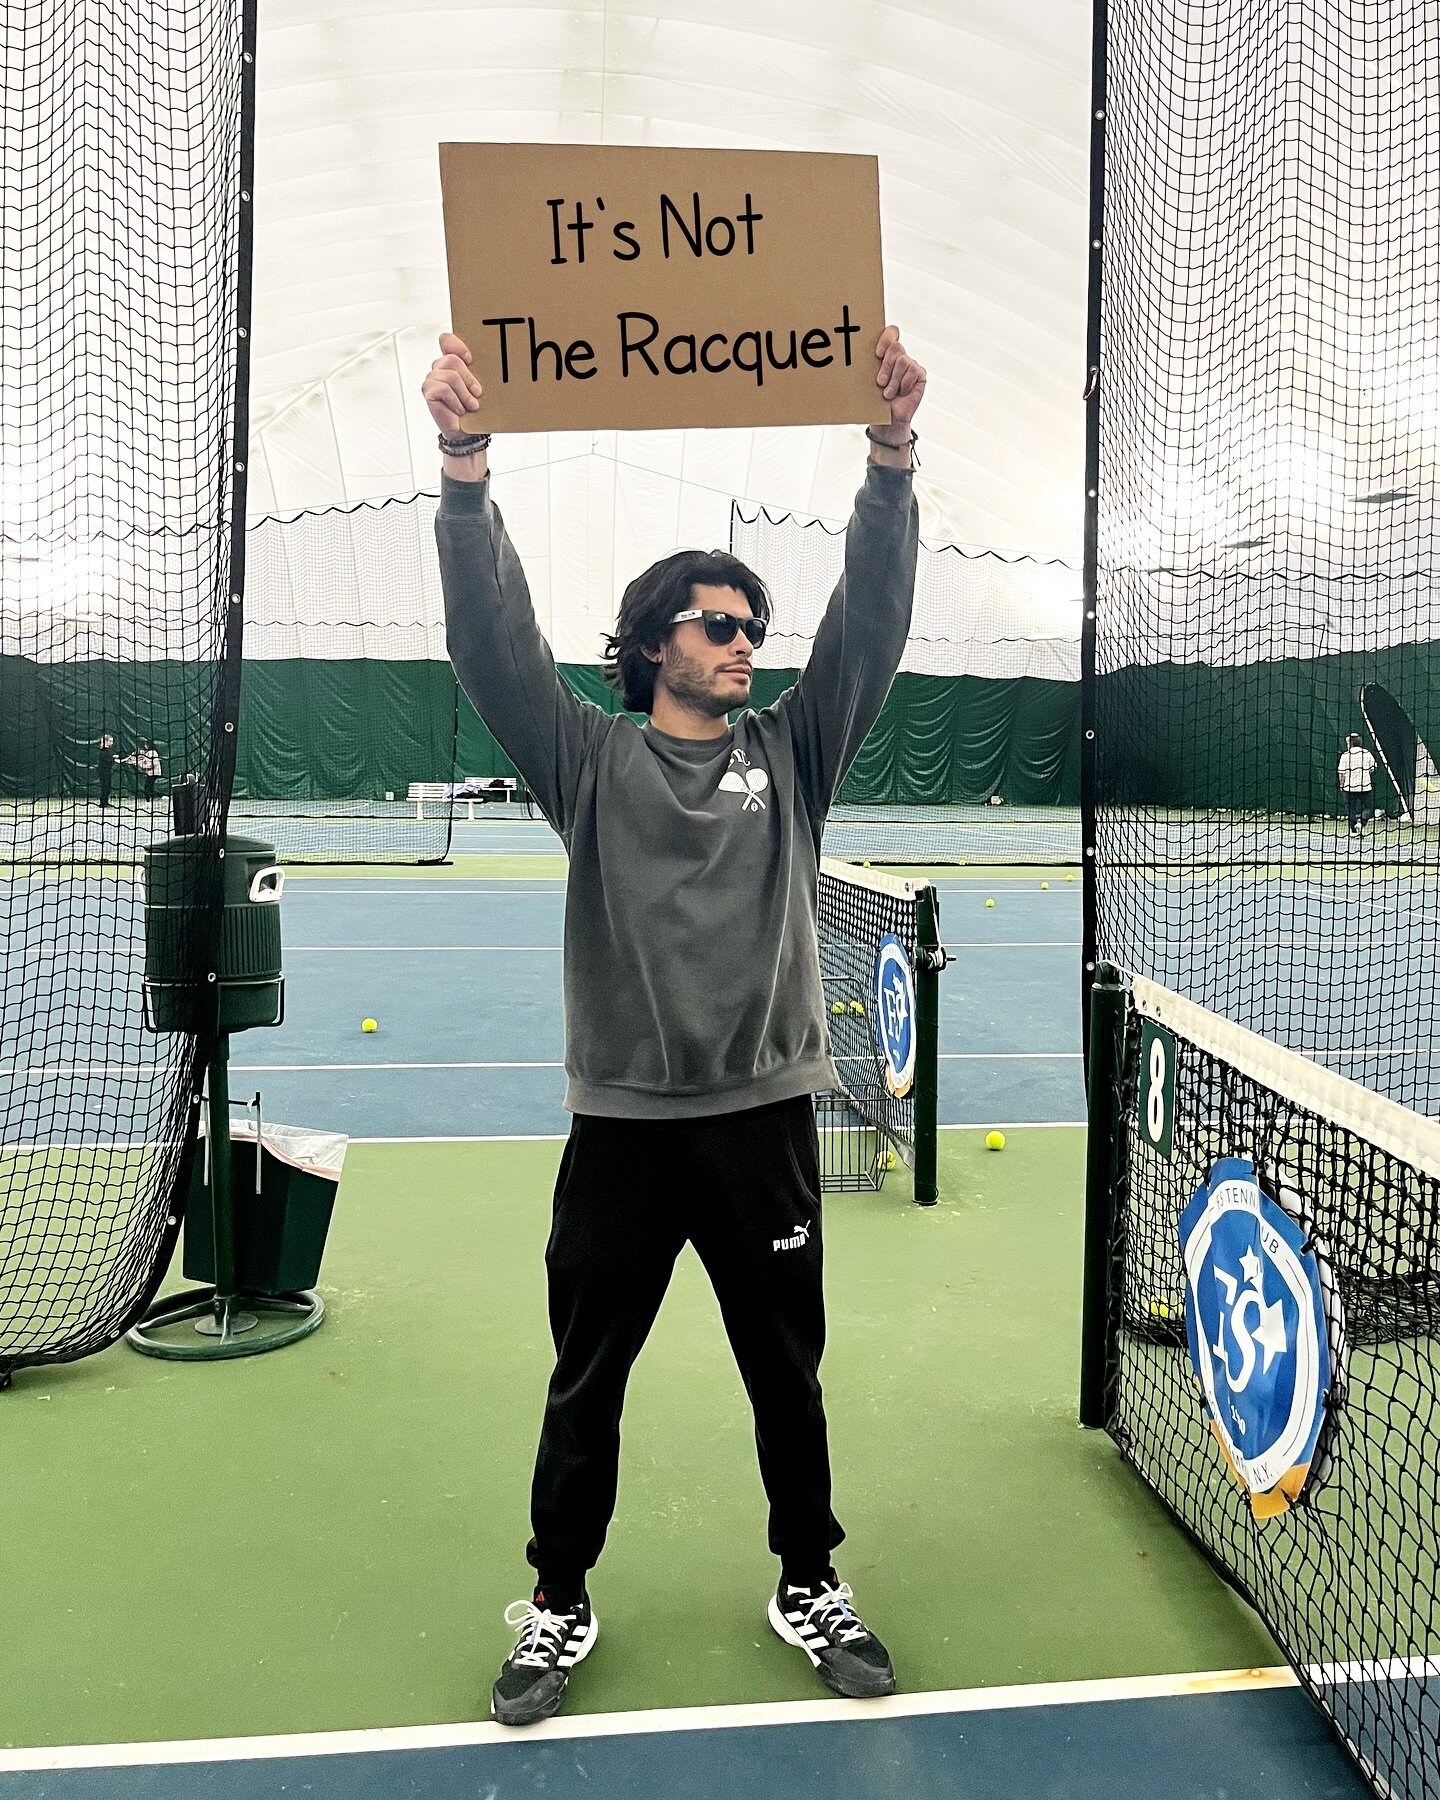 Someone had to say it! 😅
Or do you disagree? Let us know in the comments! 😉

#southamptontennis #hamptonstennis #fstcsouthampton #southamptontennisclub #tennisclinics #adultclinics #tennisinthehamptons #futurestars  #tennisinthehamptons #indoortenn